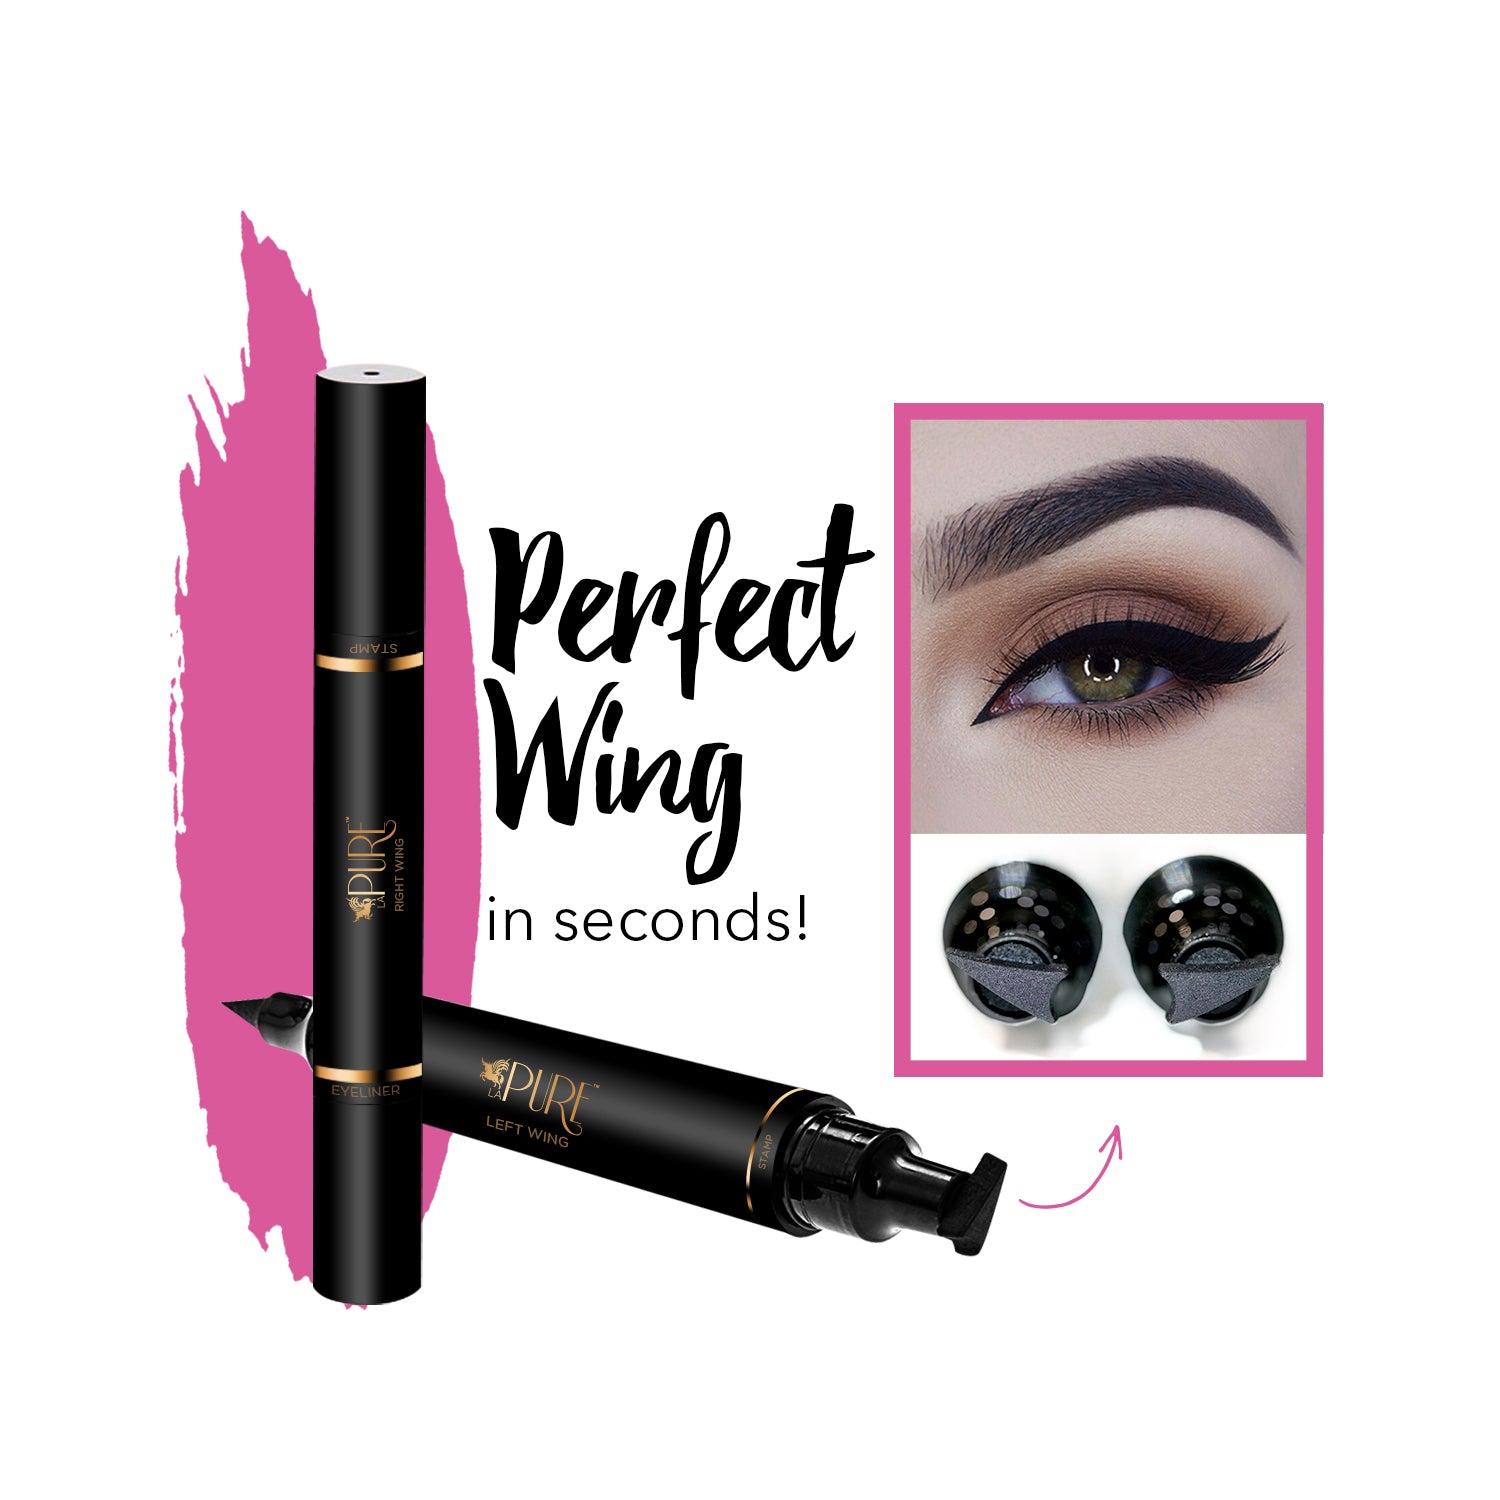 Perfect wing in seconds